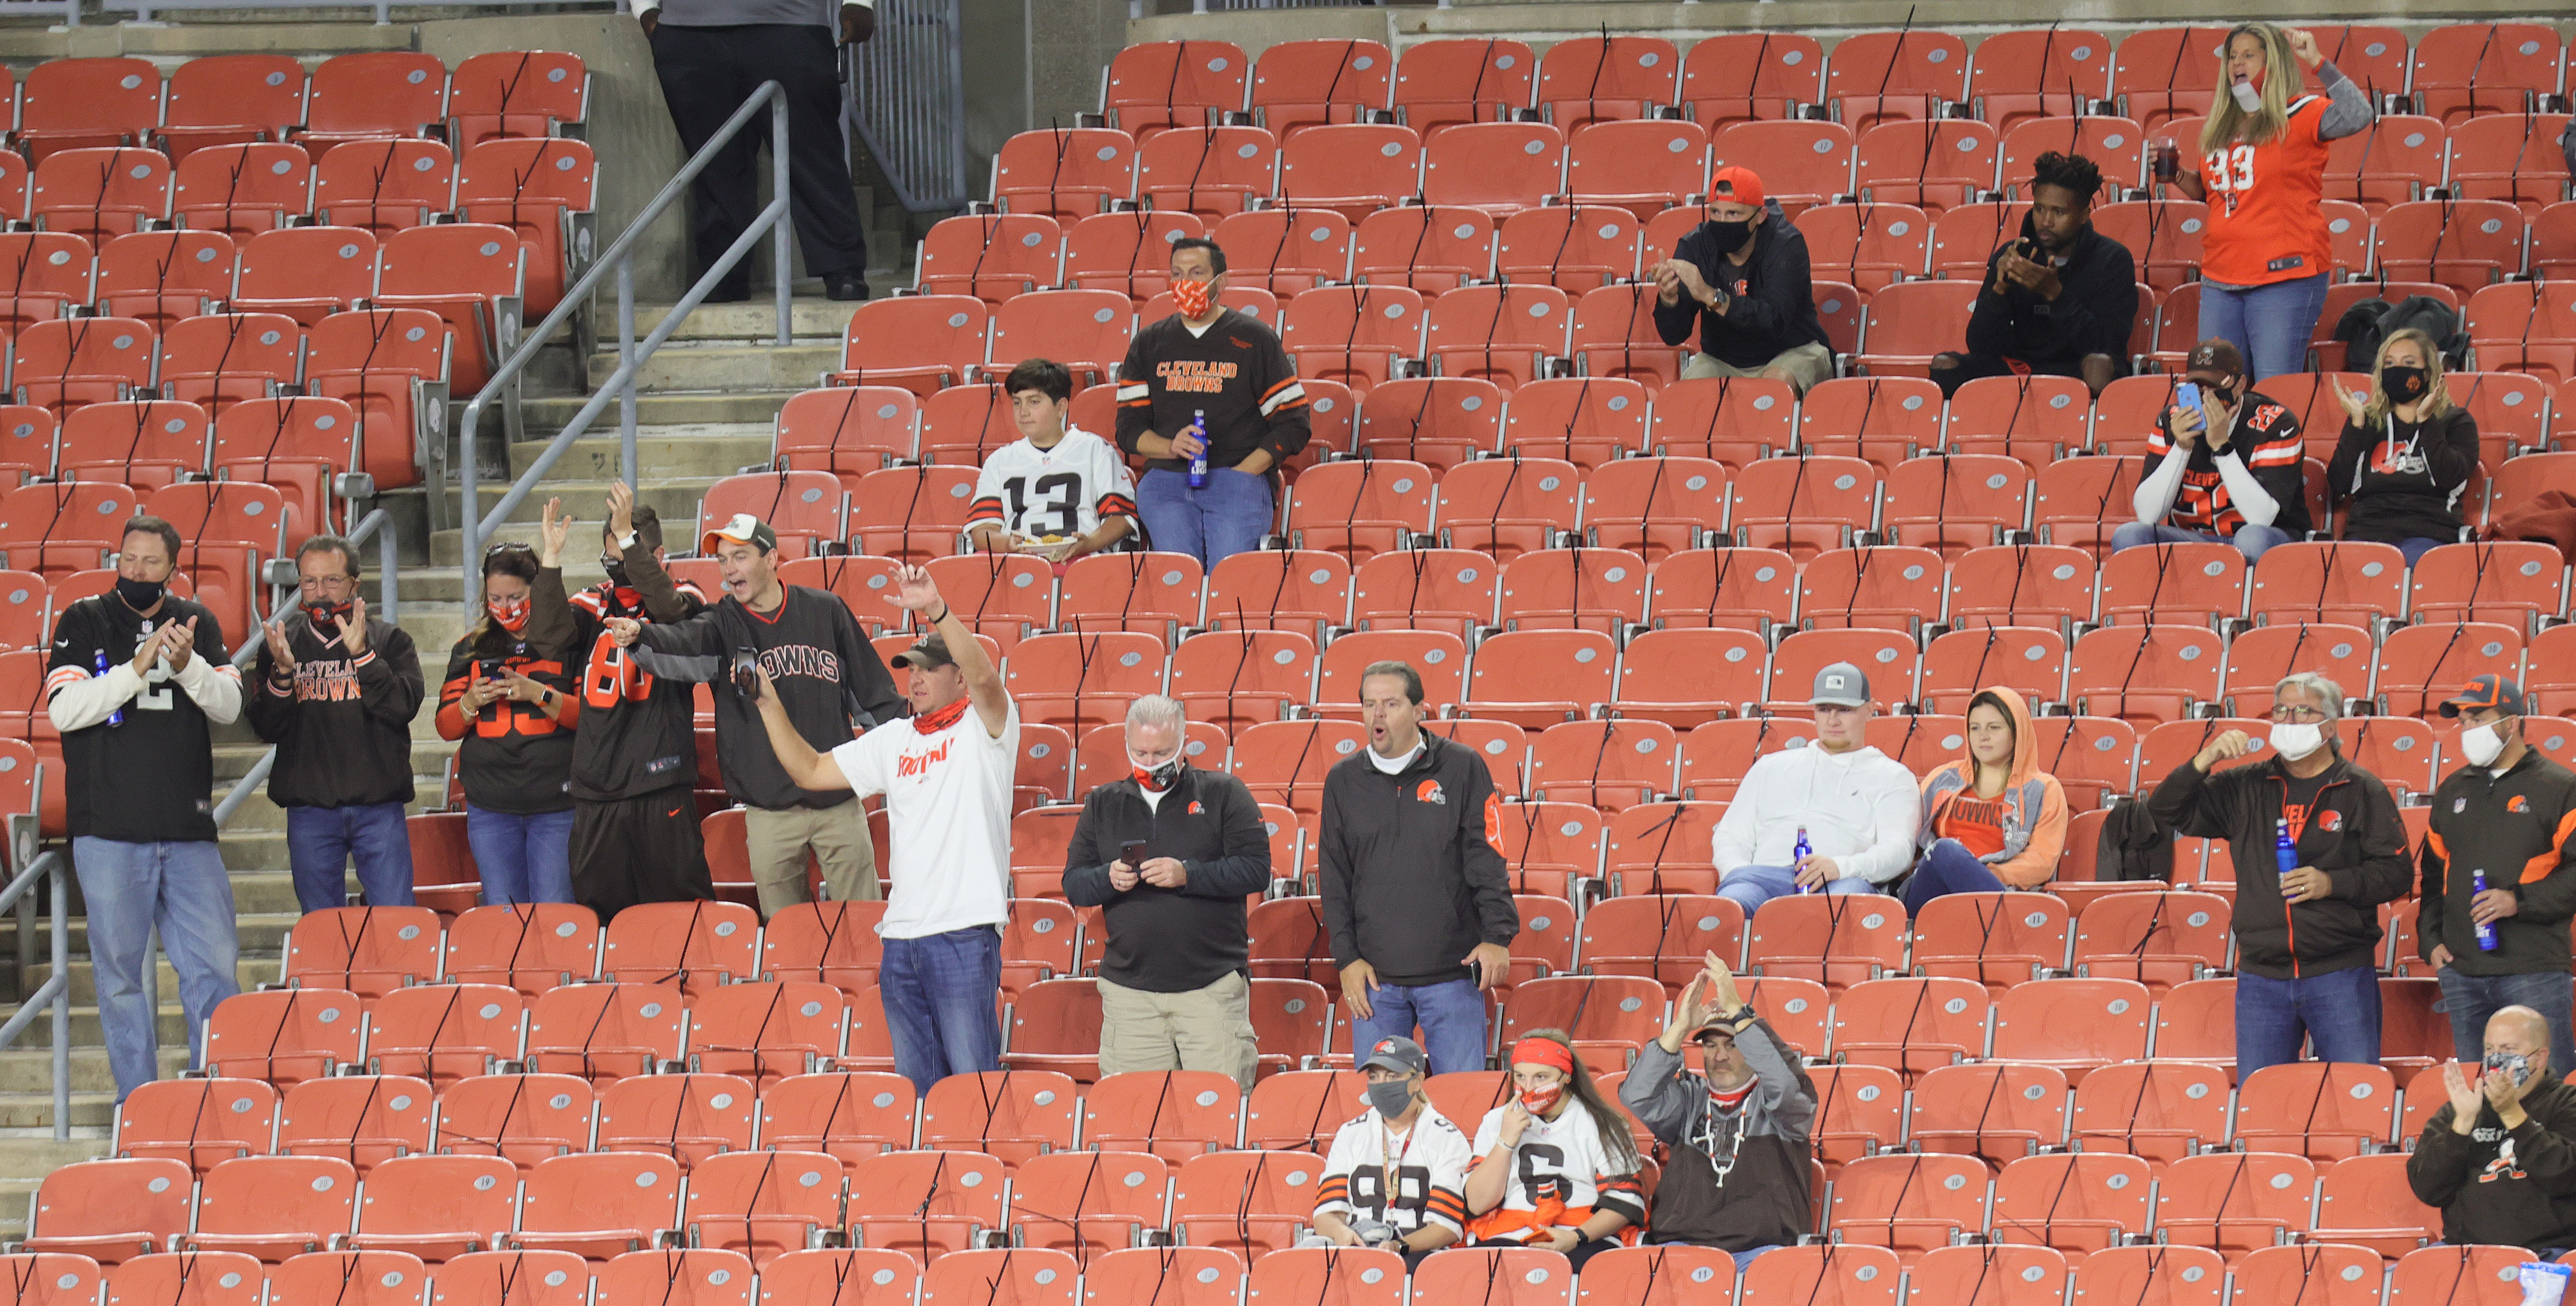 Bengals fans ranked No. 1 for biggest drinkers during games